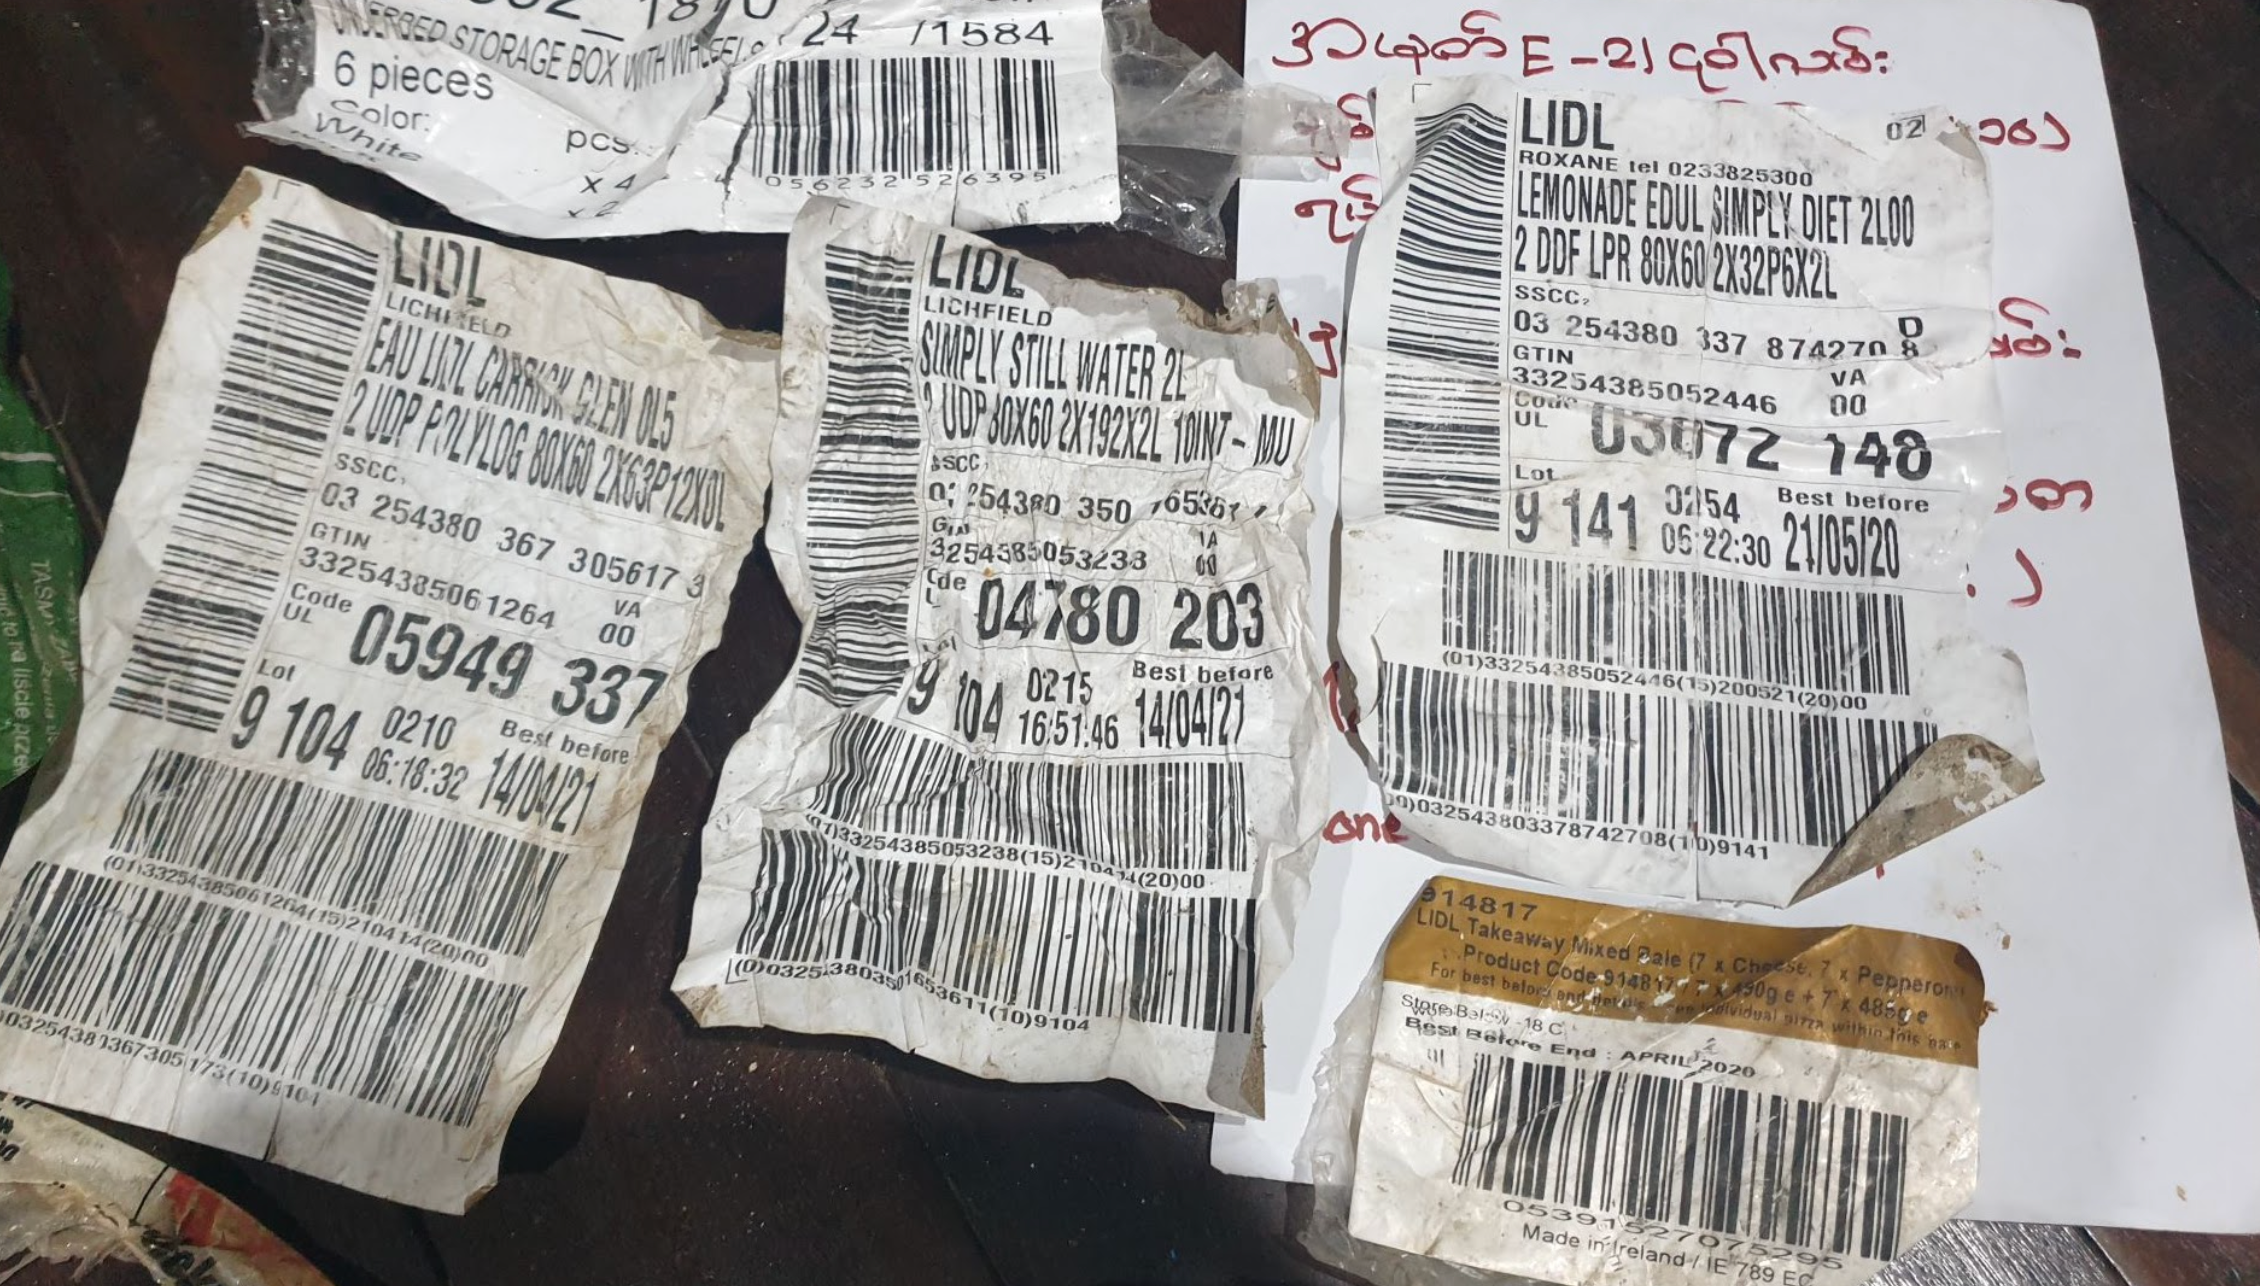 Labels from a Lidl UK branch in Lichfield, north of Birmingham, were discovered in low-income communities in Myanmar